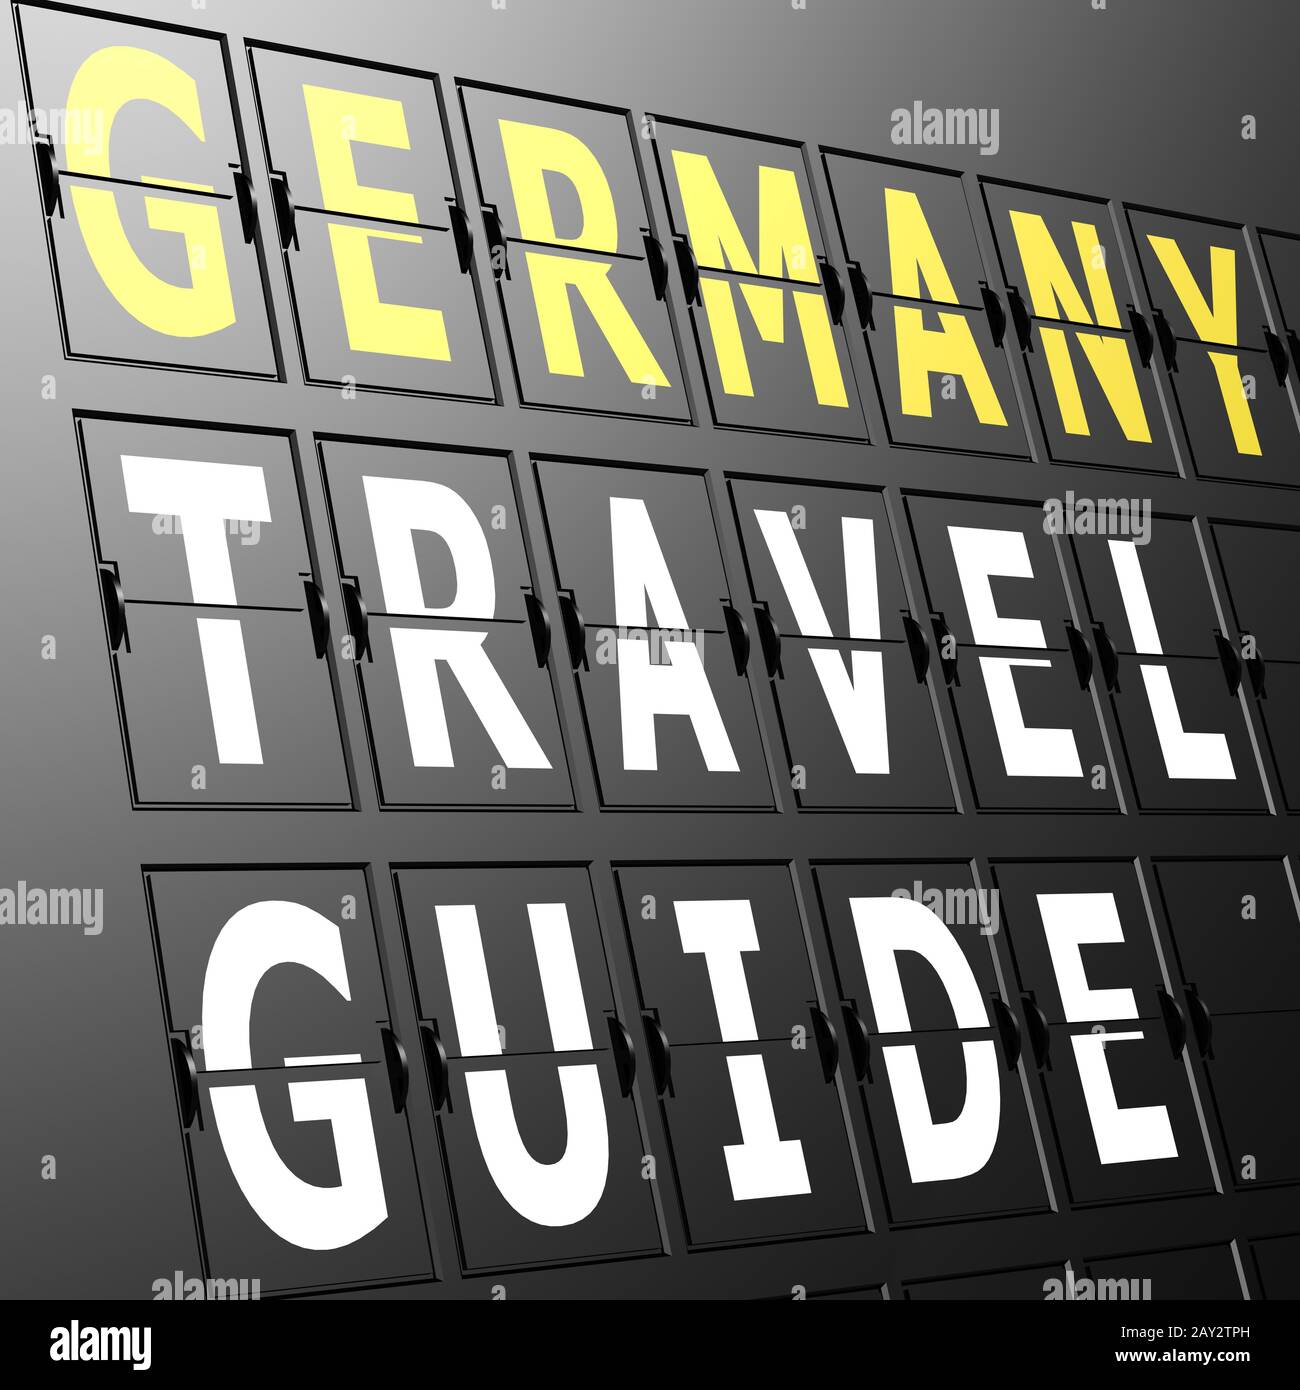 Airport display Germany travel guide Stock Photo